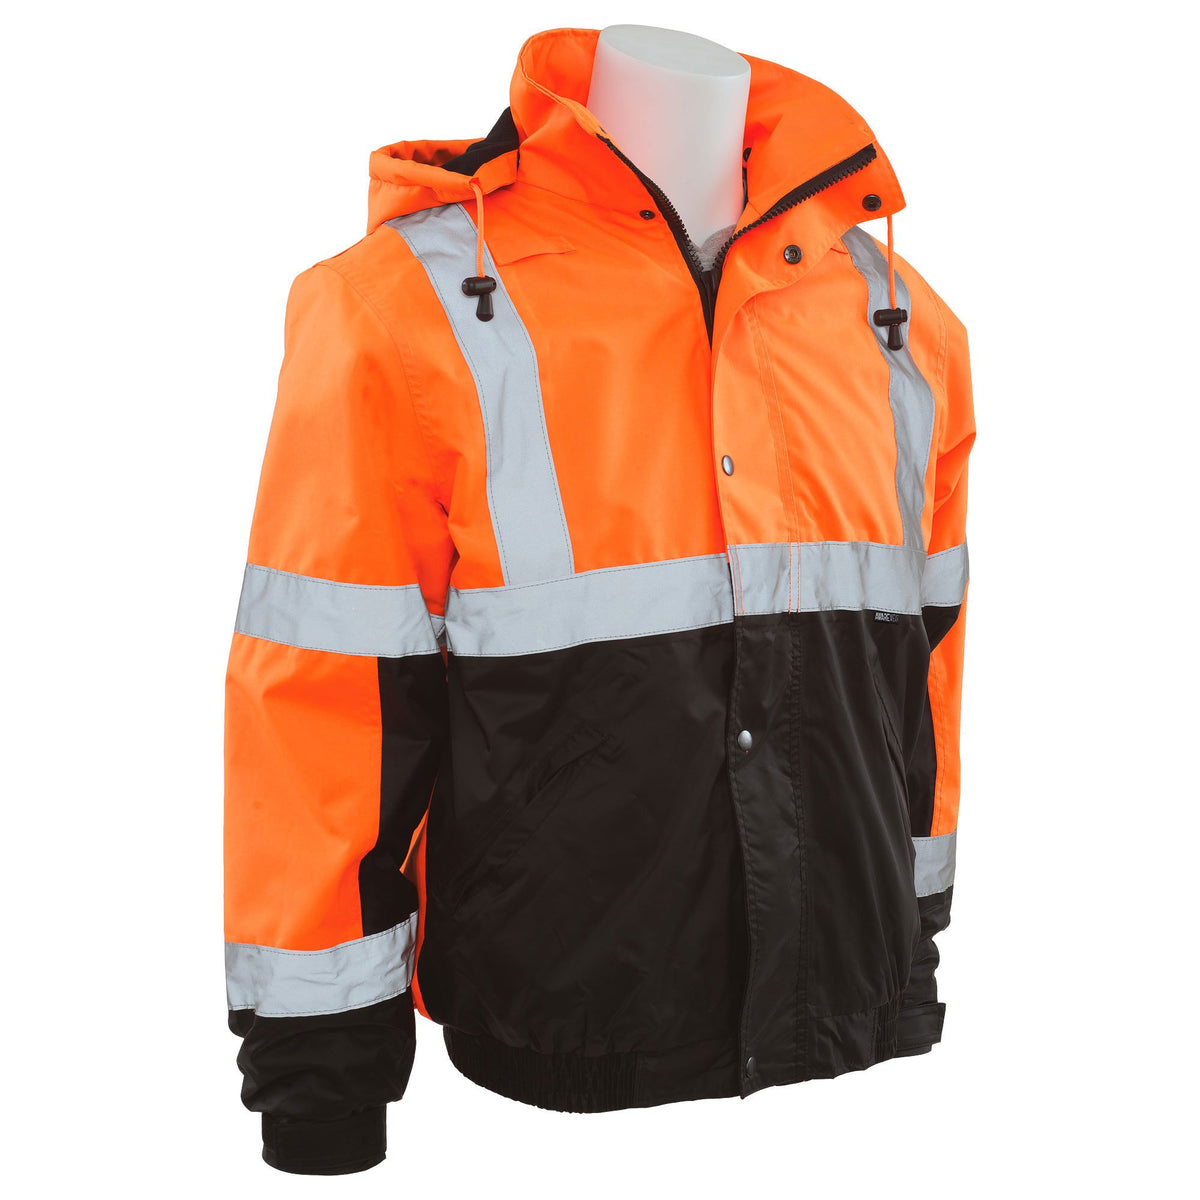 W106T Bomber Jacket with Storm Flap and Hood - Tall